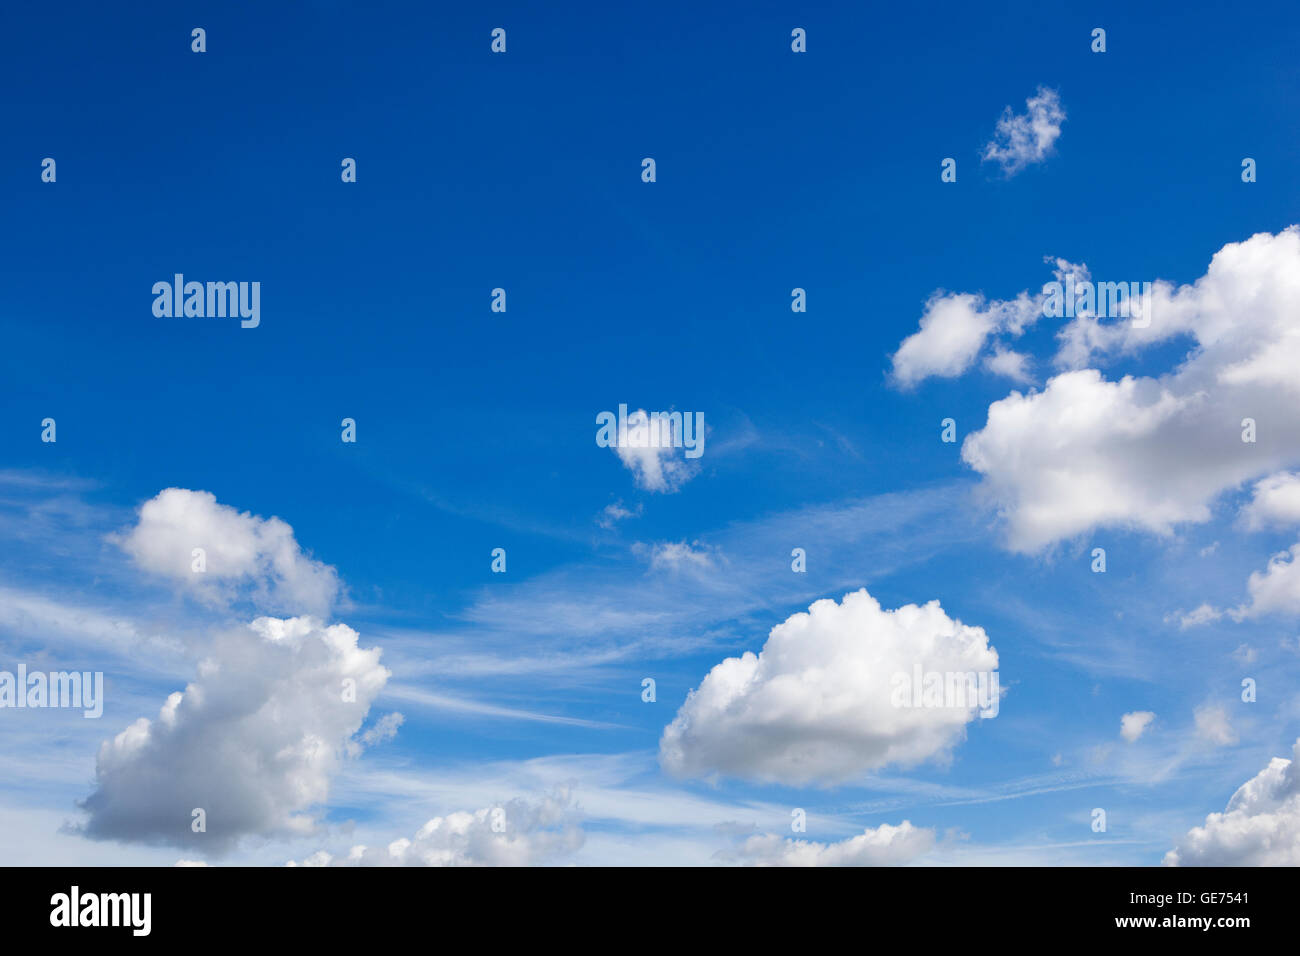 Beautiful summer sky background with fluffy white clouds on blue. Stock Photo